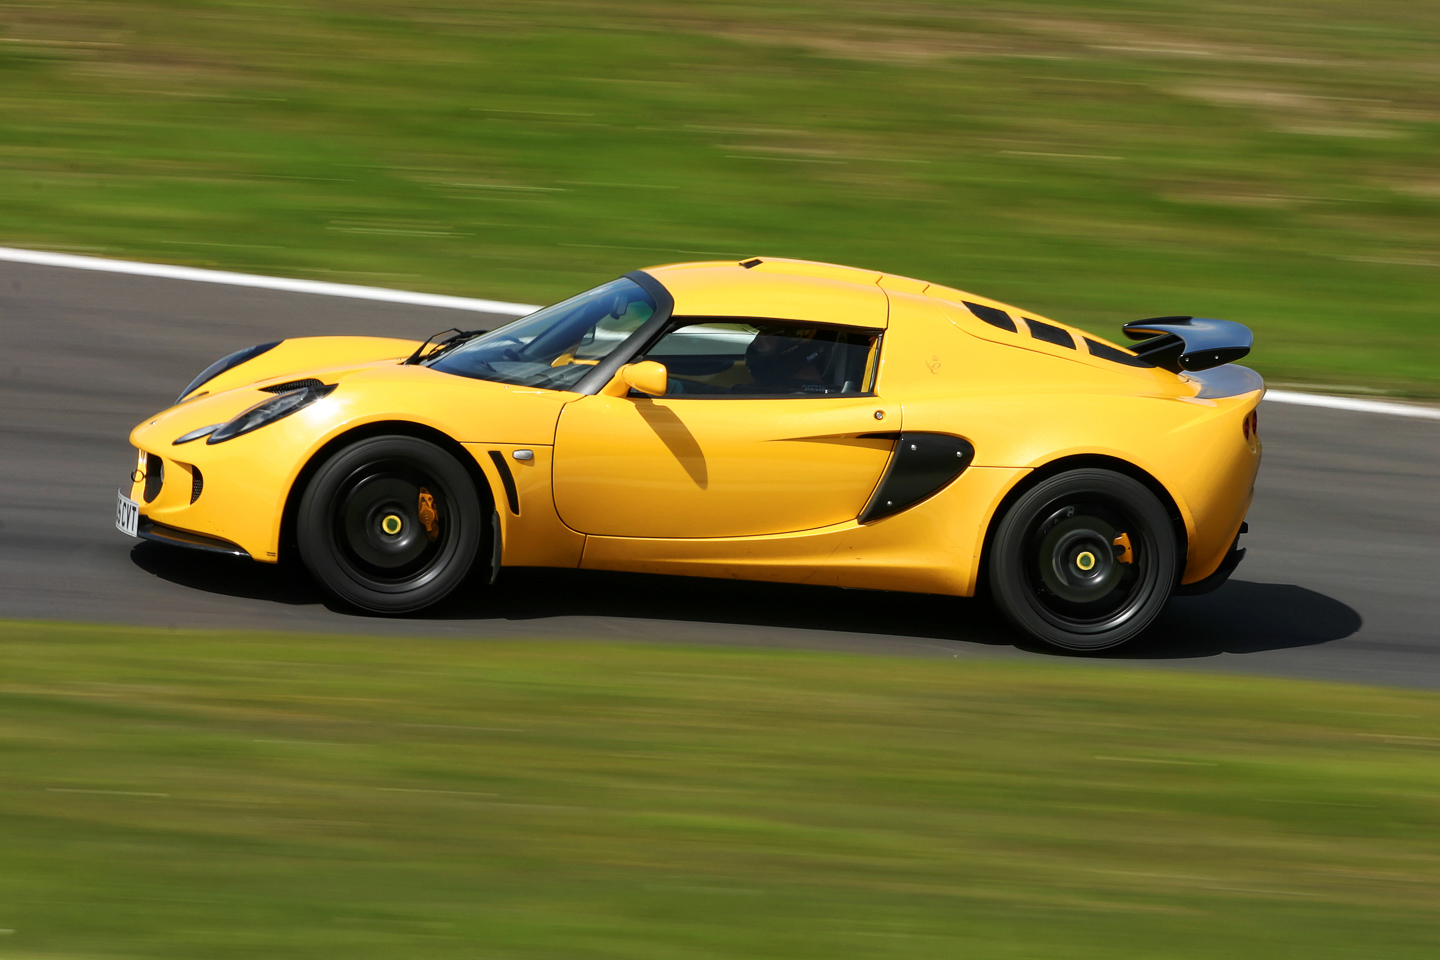 Lotus Exige at Cadwell Park